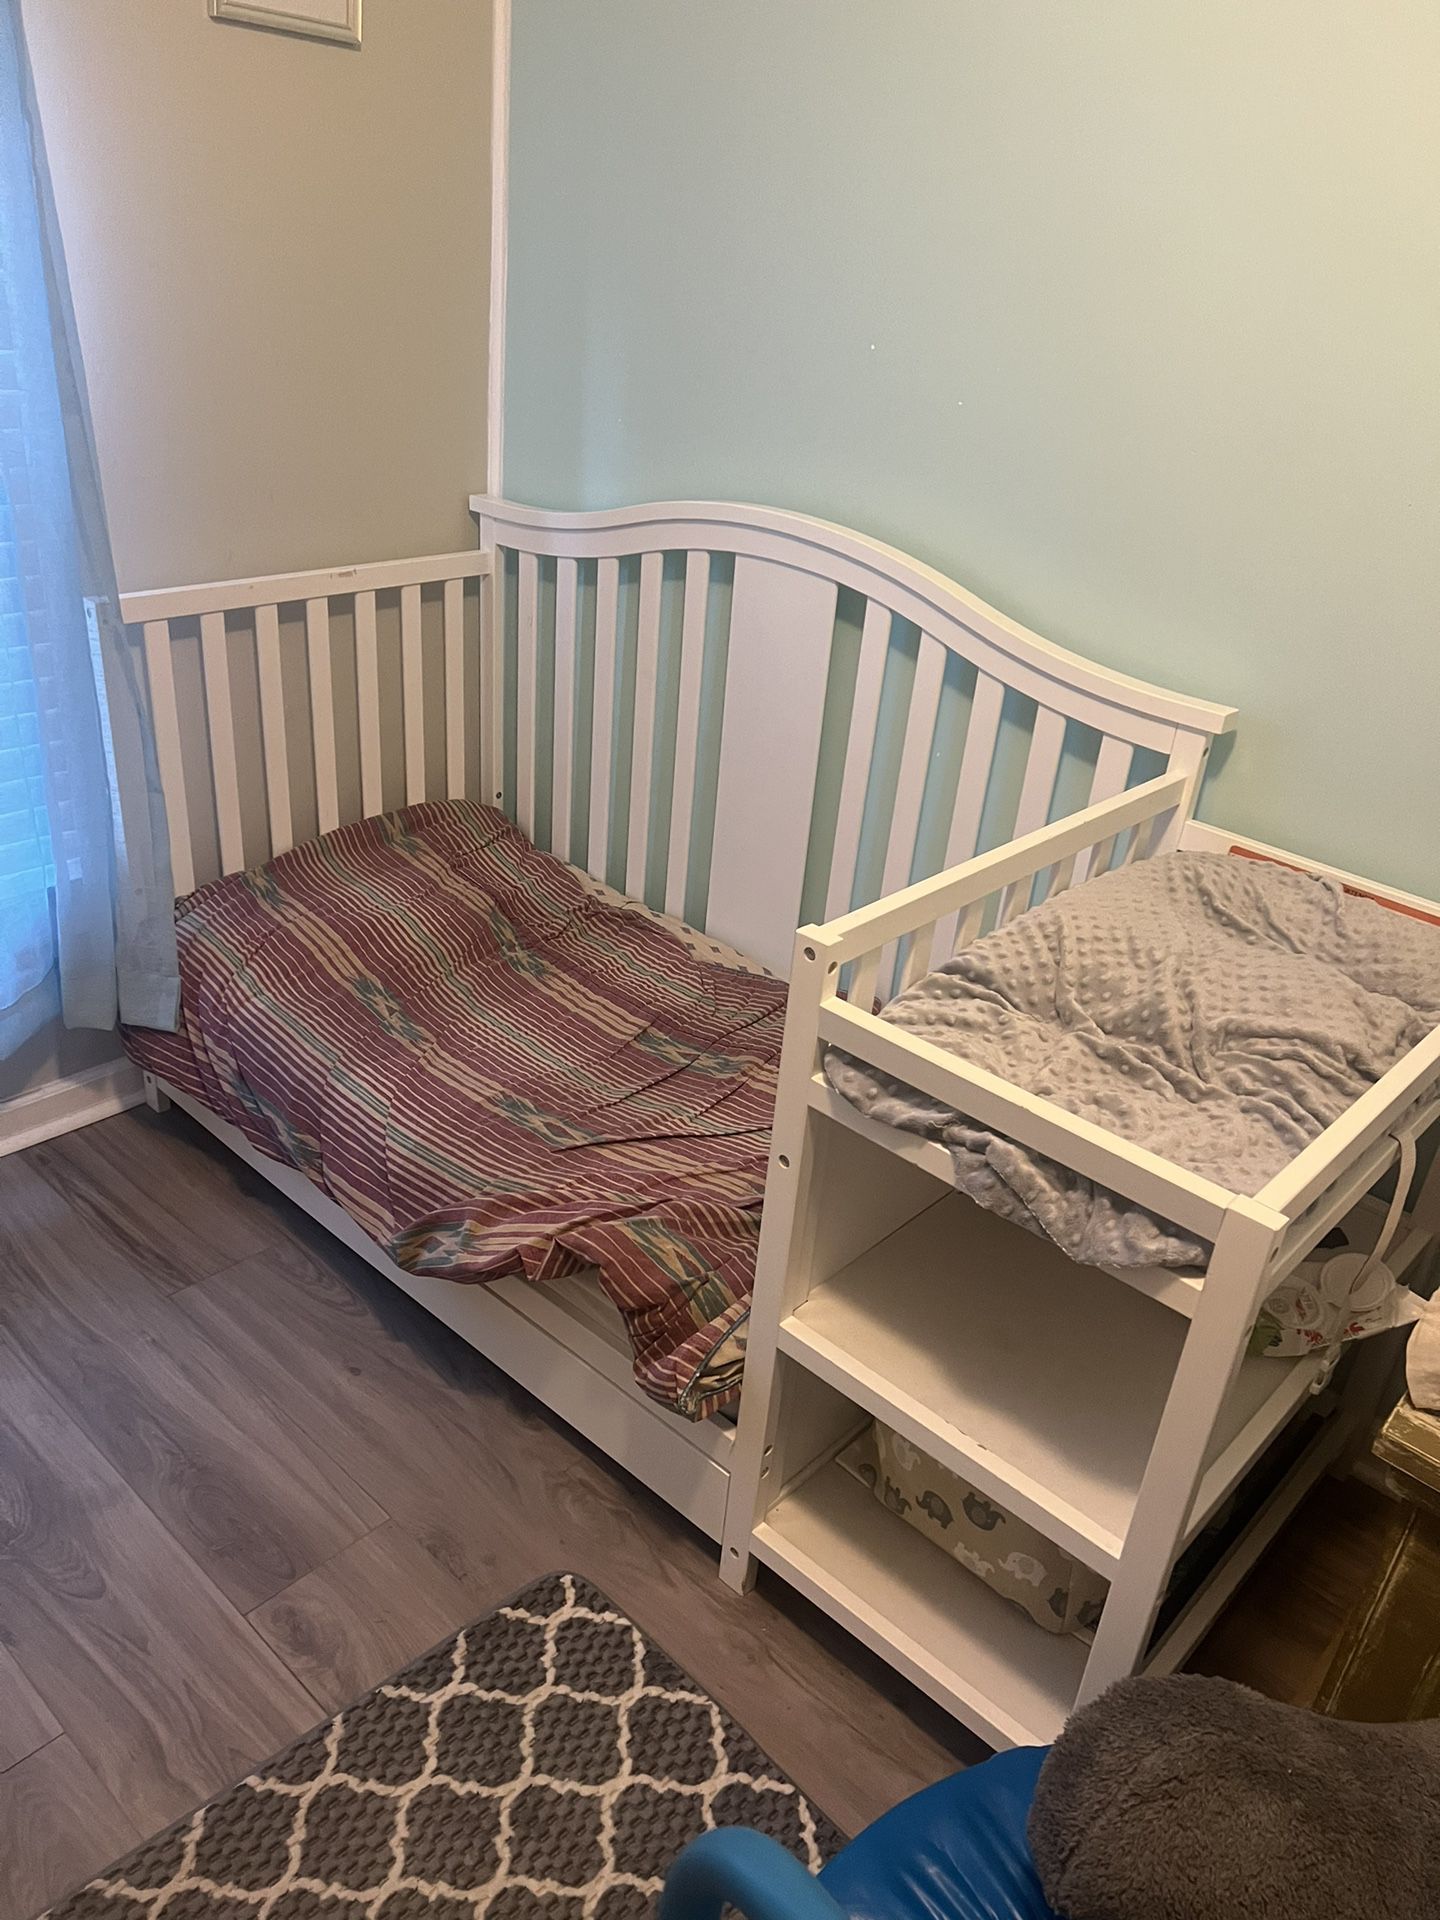 Baby Crib/Toddler Bed Combo With Changing Table